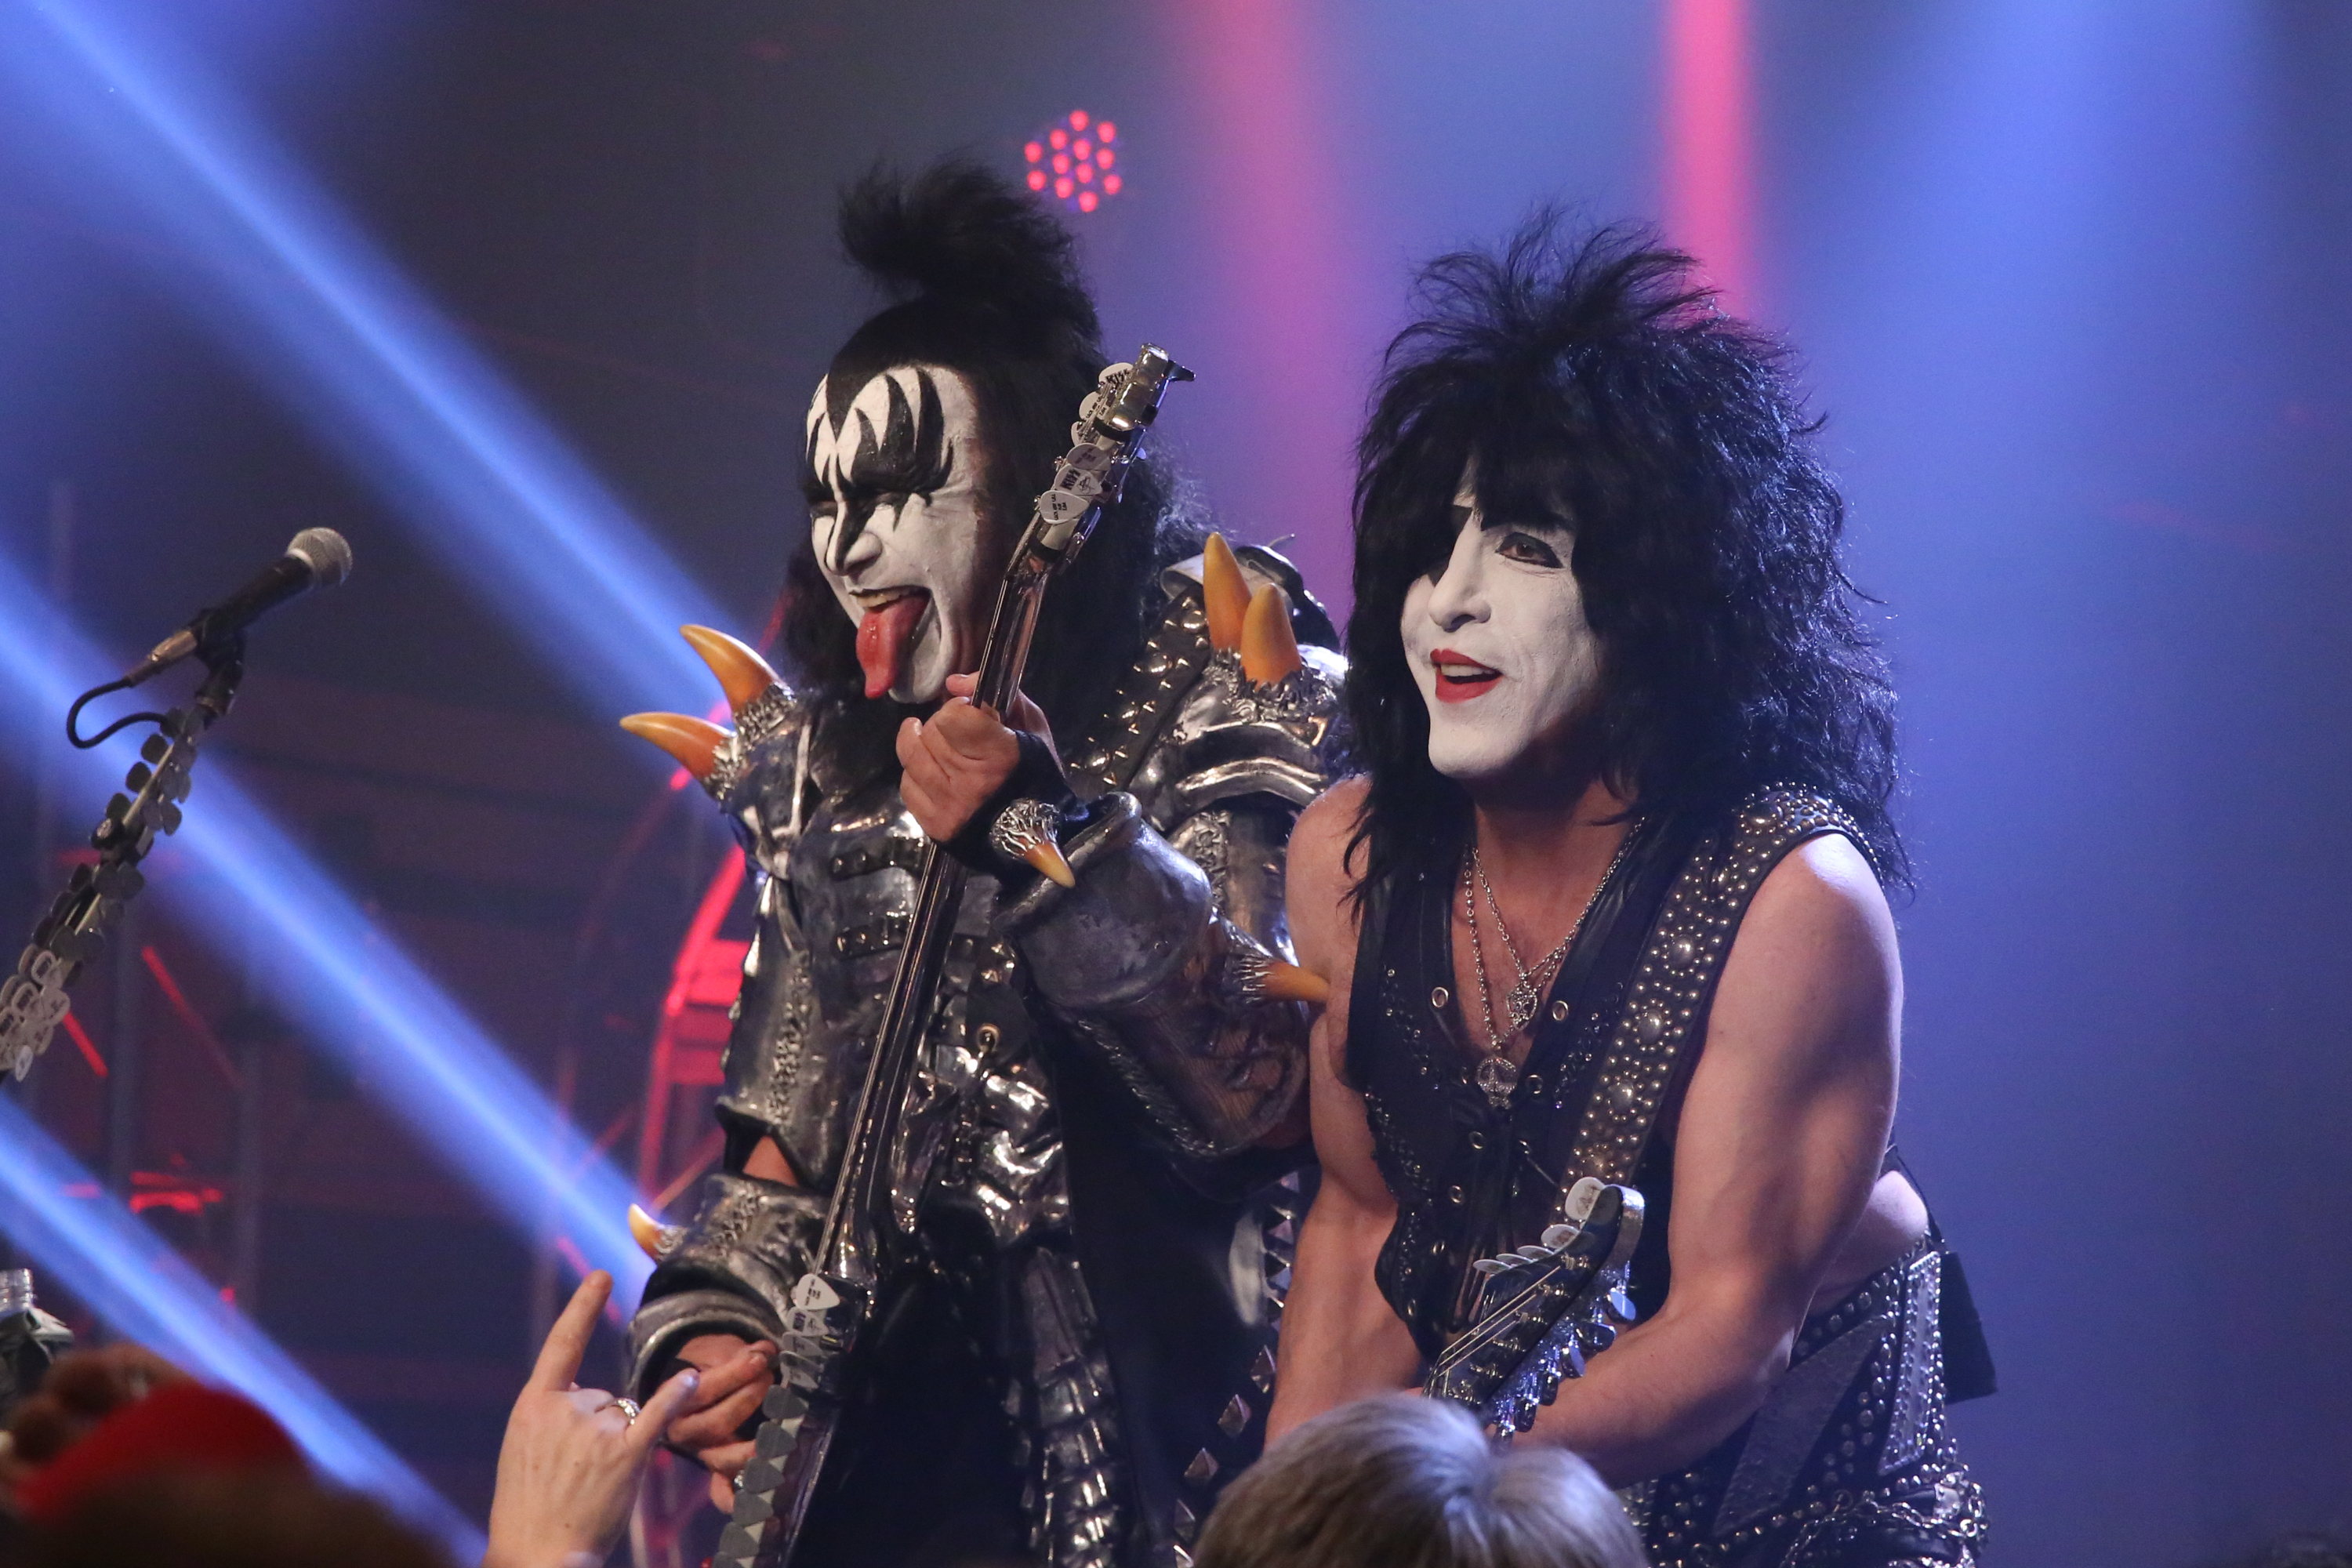 From left: Gene Simmons and Paul Stanley of Kiss perform on The Tonight Show Starring Jimmy Fallon on April 11, 2014.